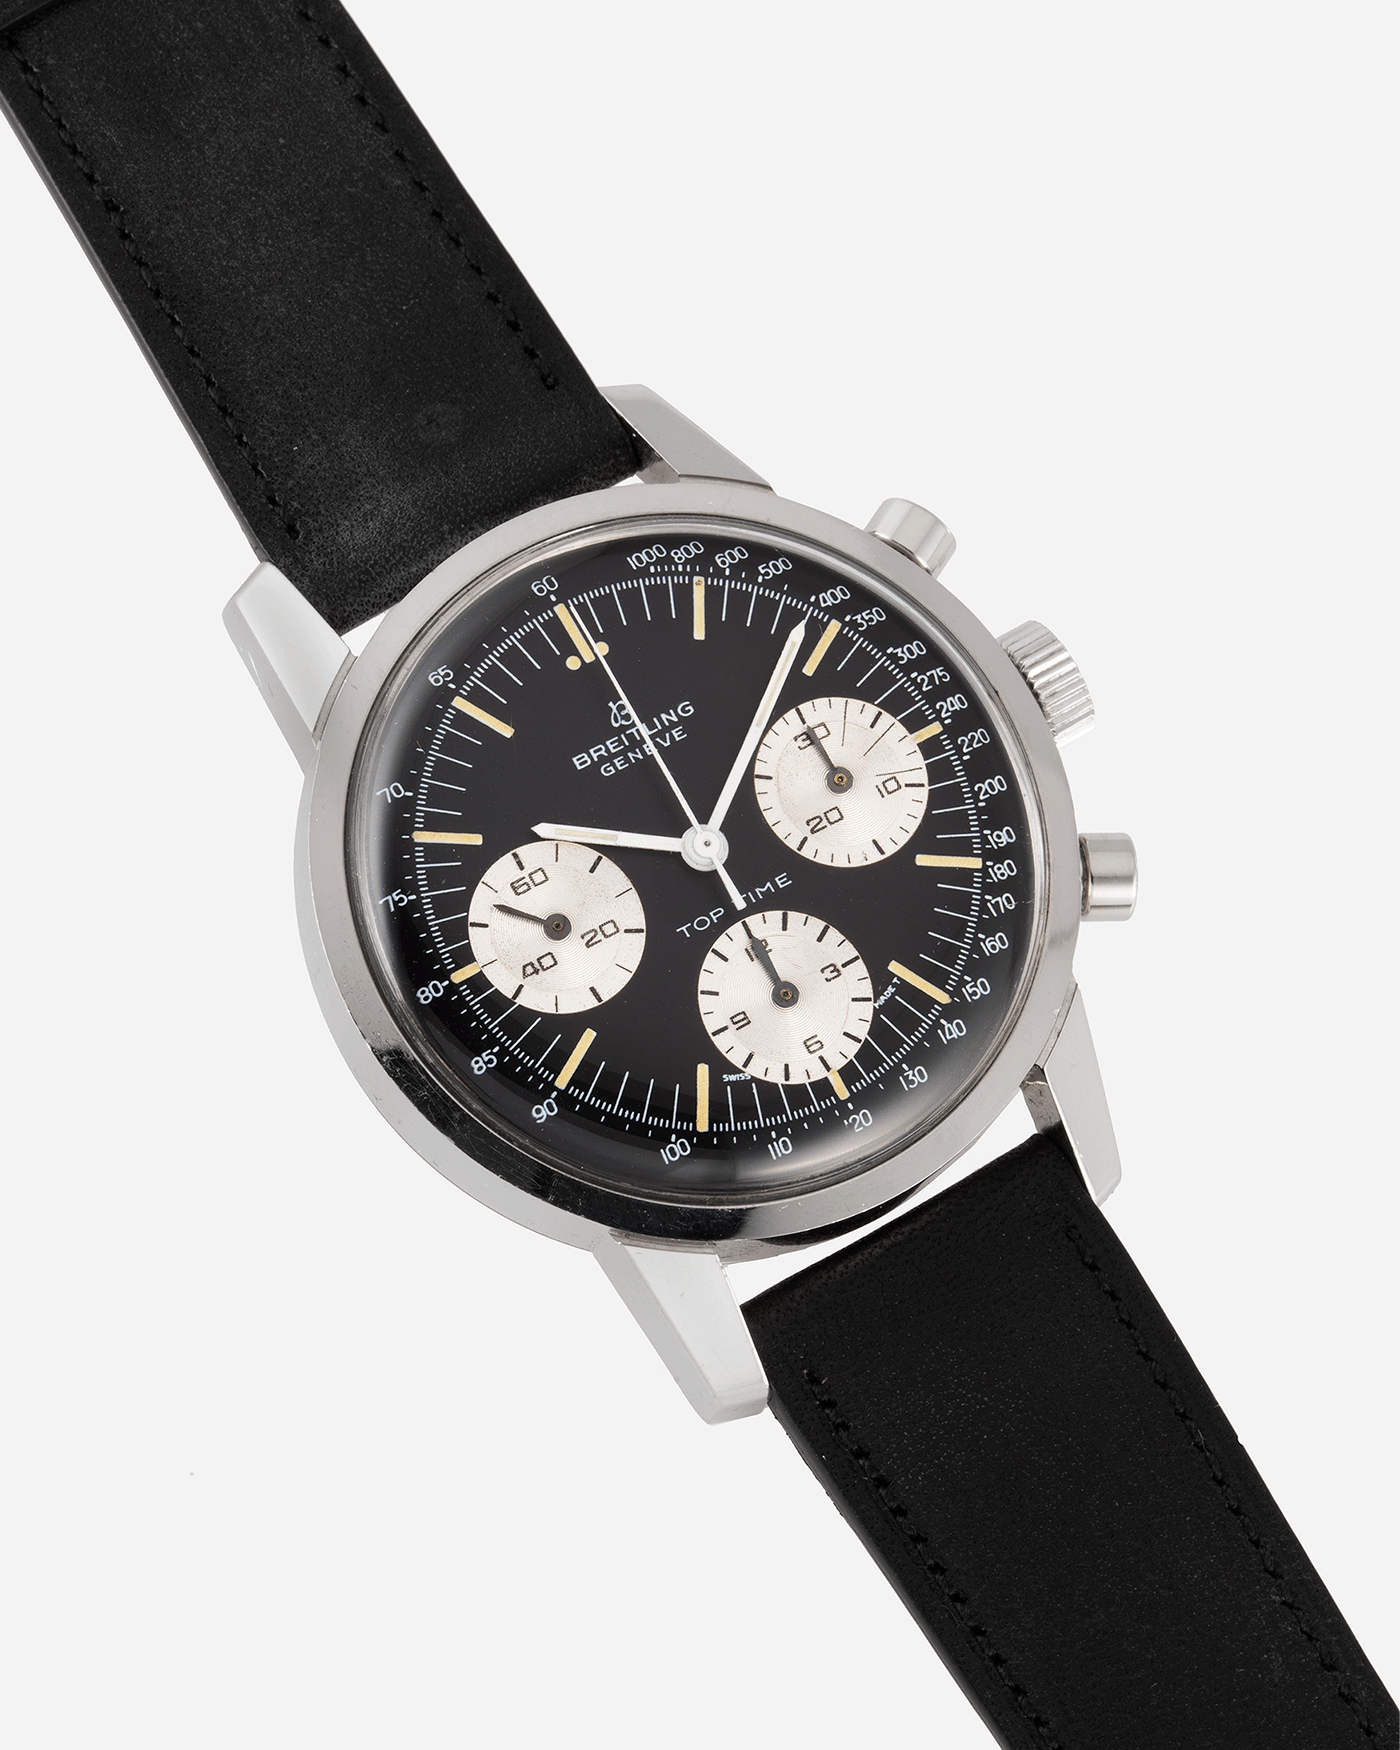 Breitling Top Time Ref. 810 Vintage Racing Chronograph Watch | S.Song ...